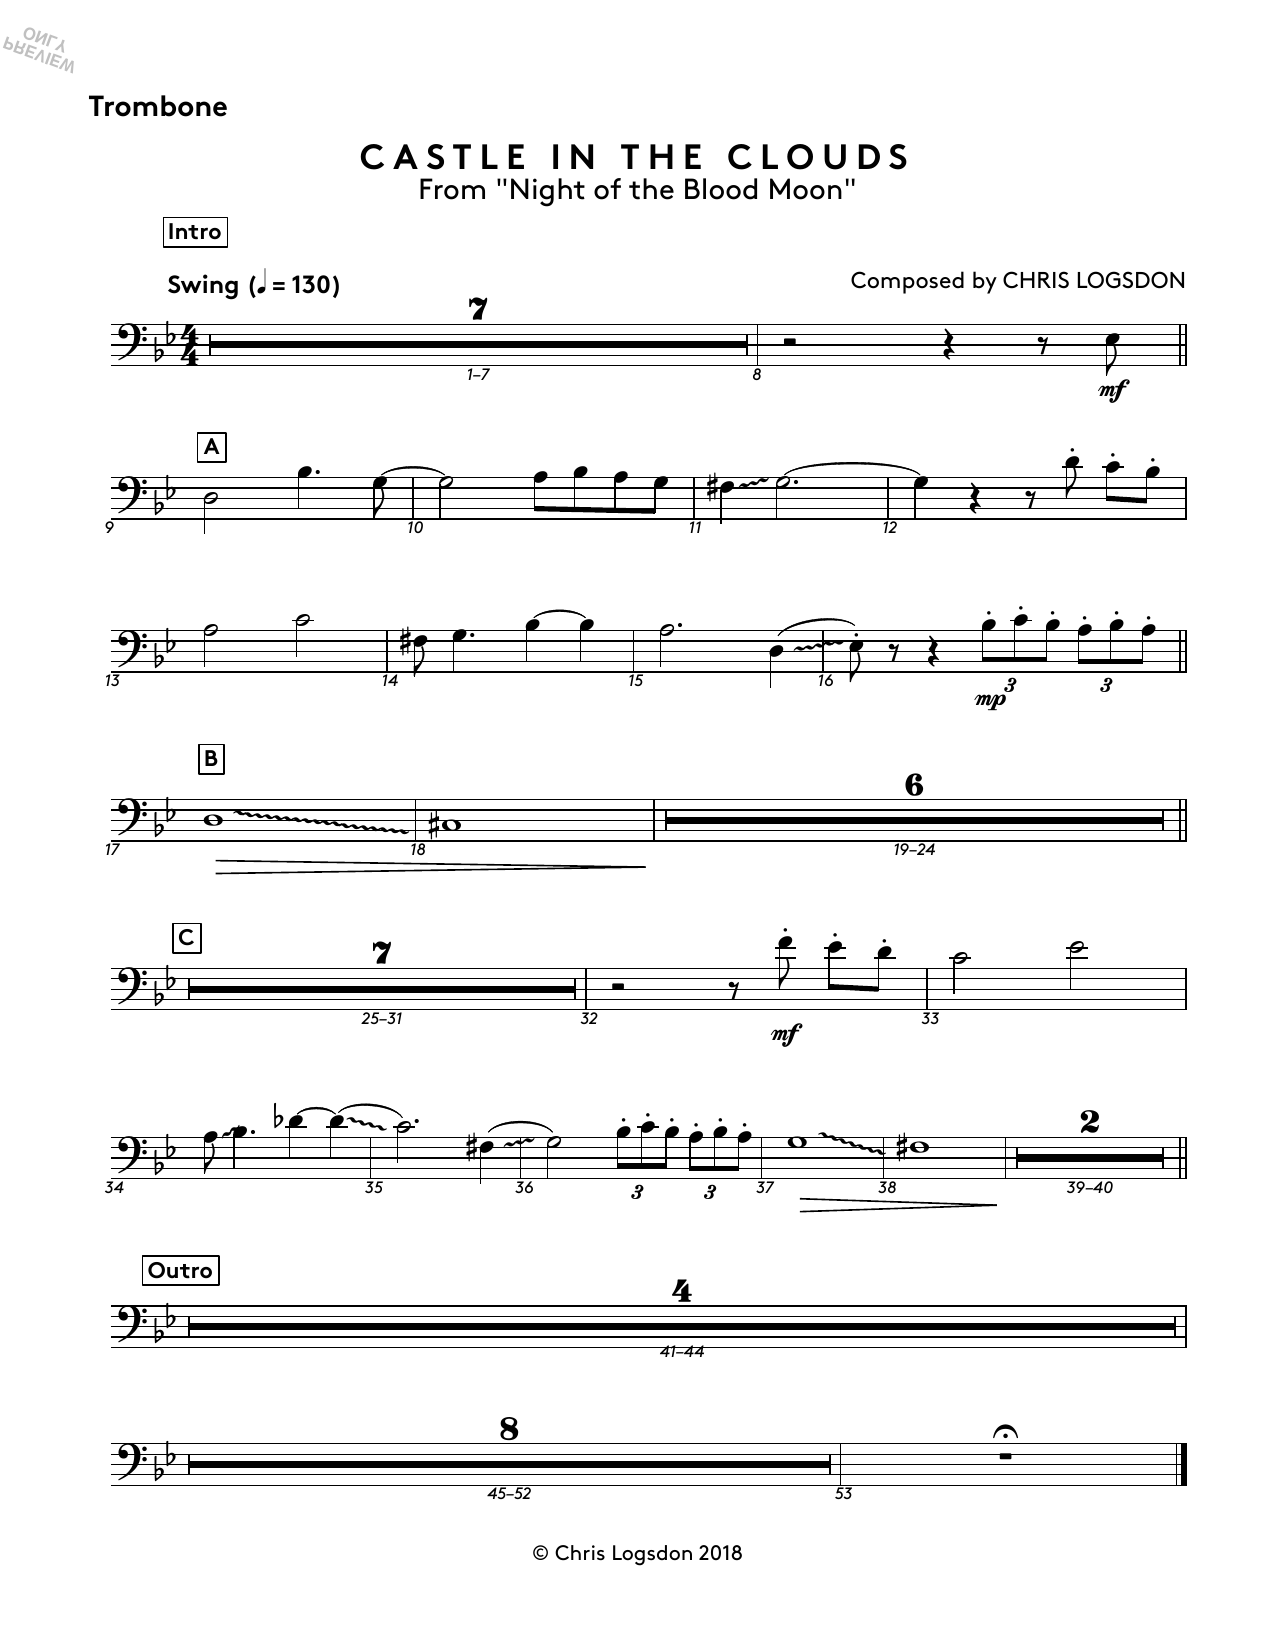 Chris Logsdon Castle In The Clouds (from Night of the Blood Moon) - Trombone sheet music notes and chords. Download Printable PDF.